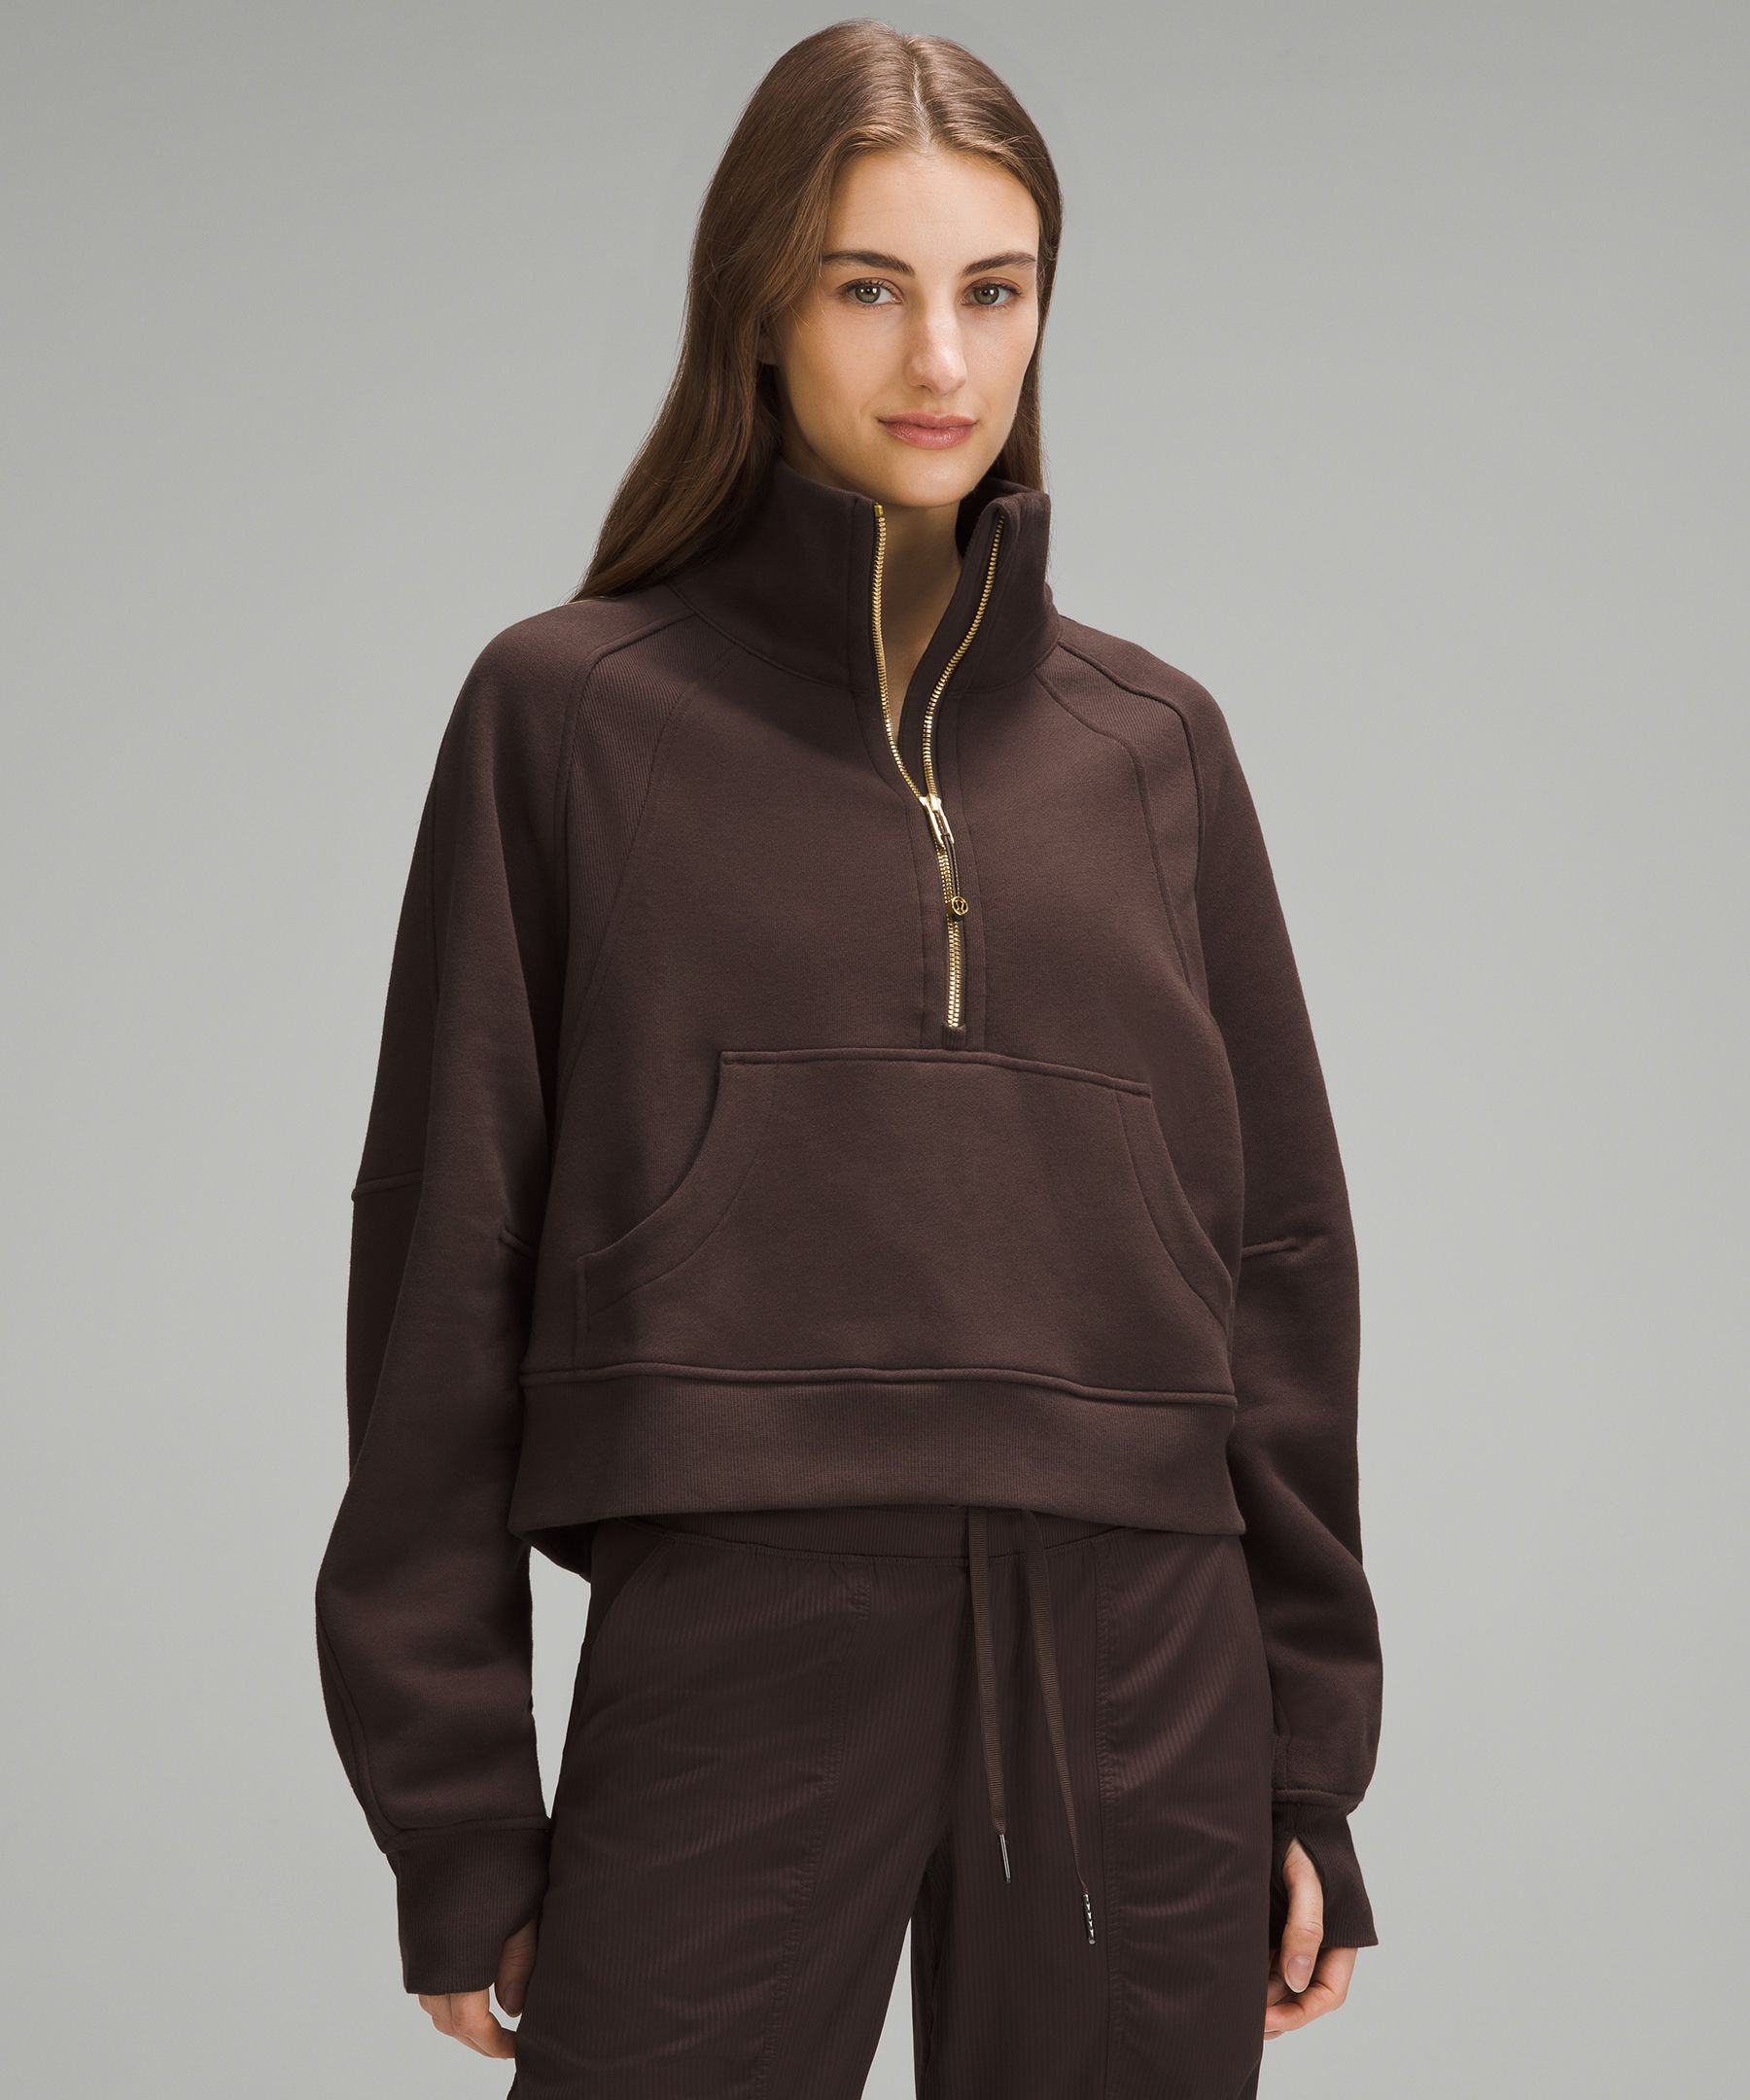 Trench scuba half-zip (XL/XXL) dyed with brown fabric dye! : r